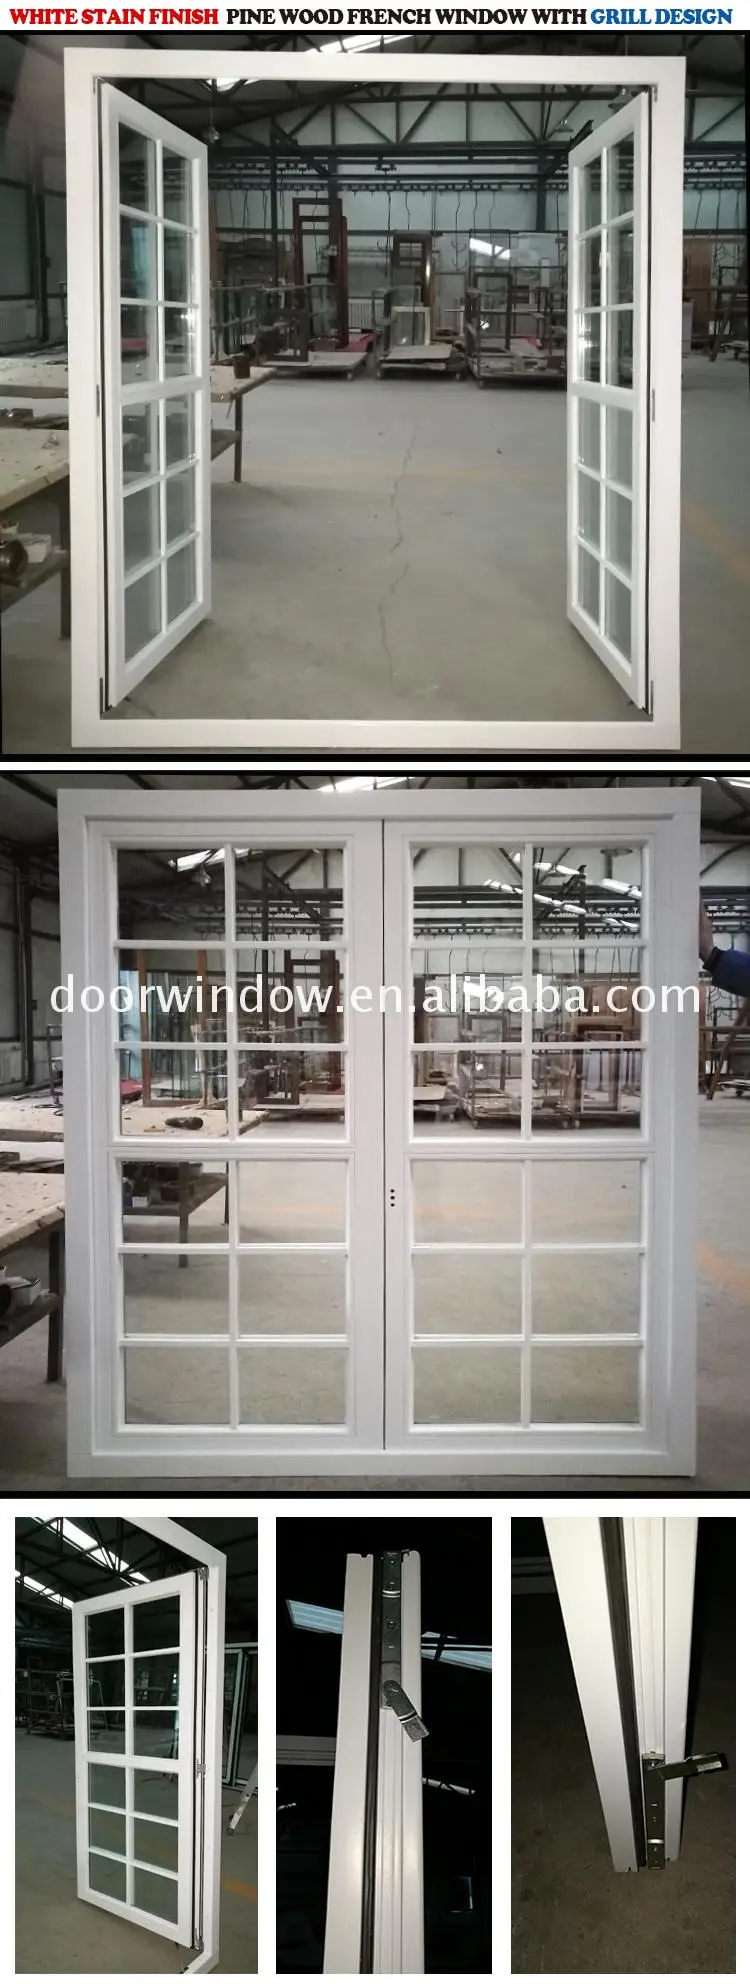 China factory supplied top quality wood windows dallas grill design for home pdf images